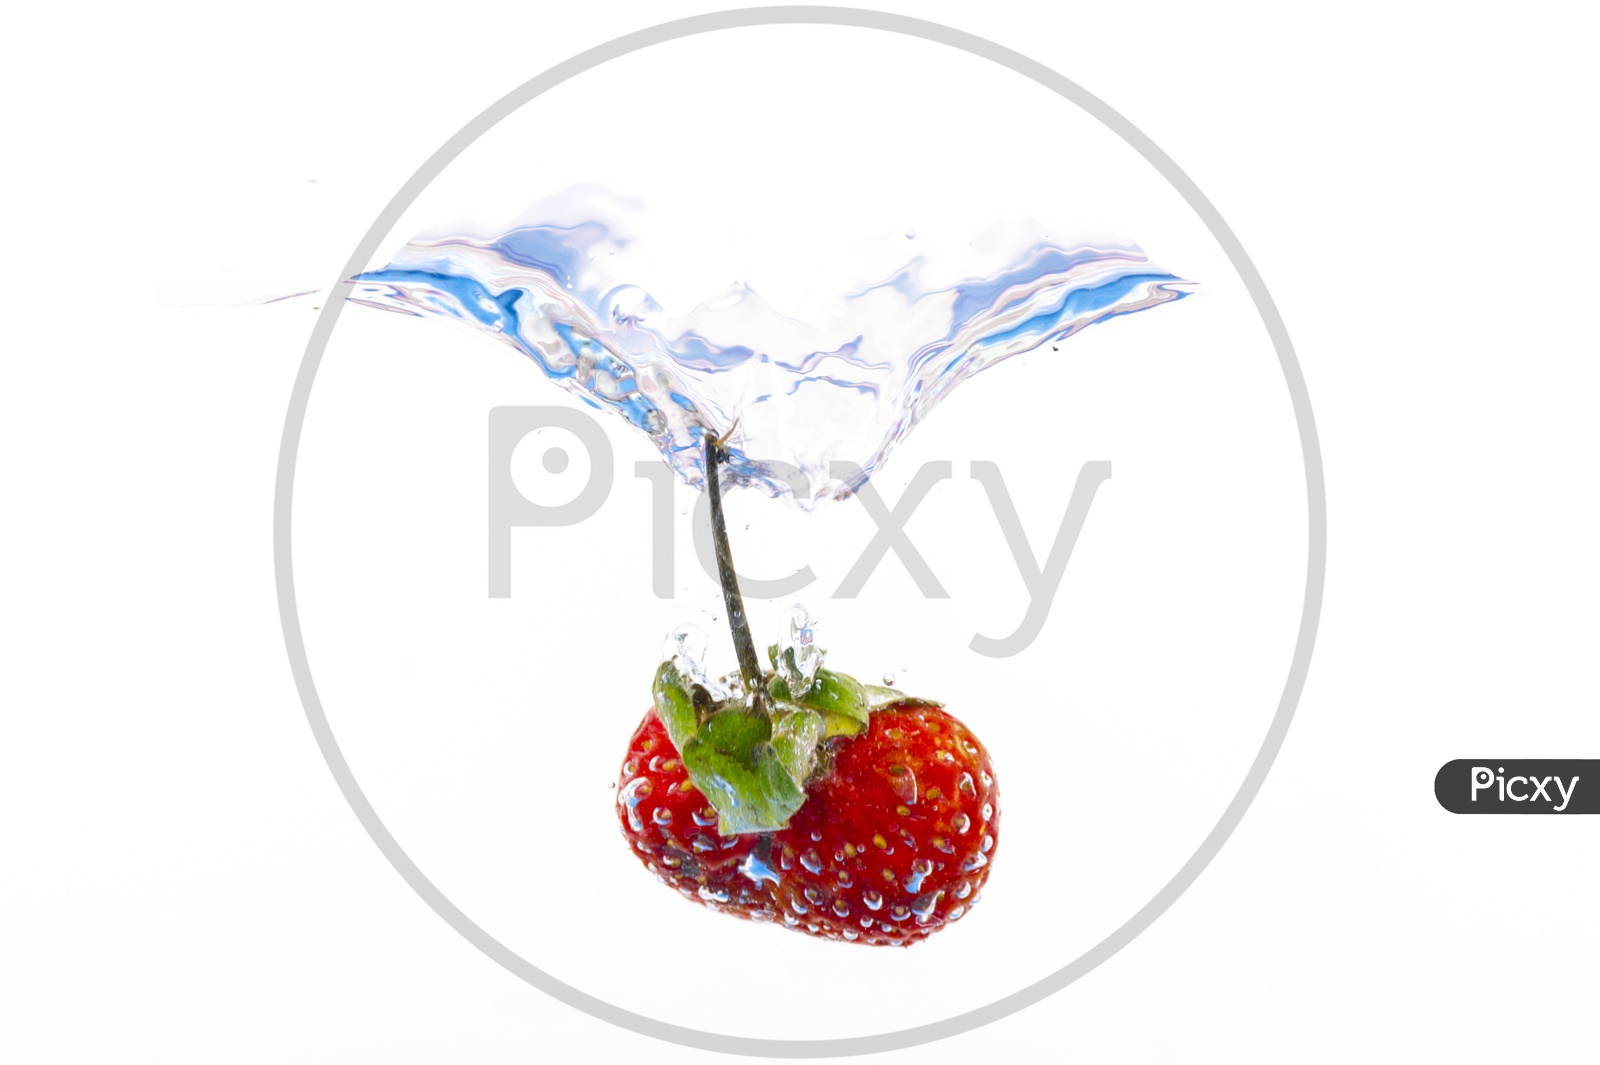 fresh strawberry dropped into water with splash on white background